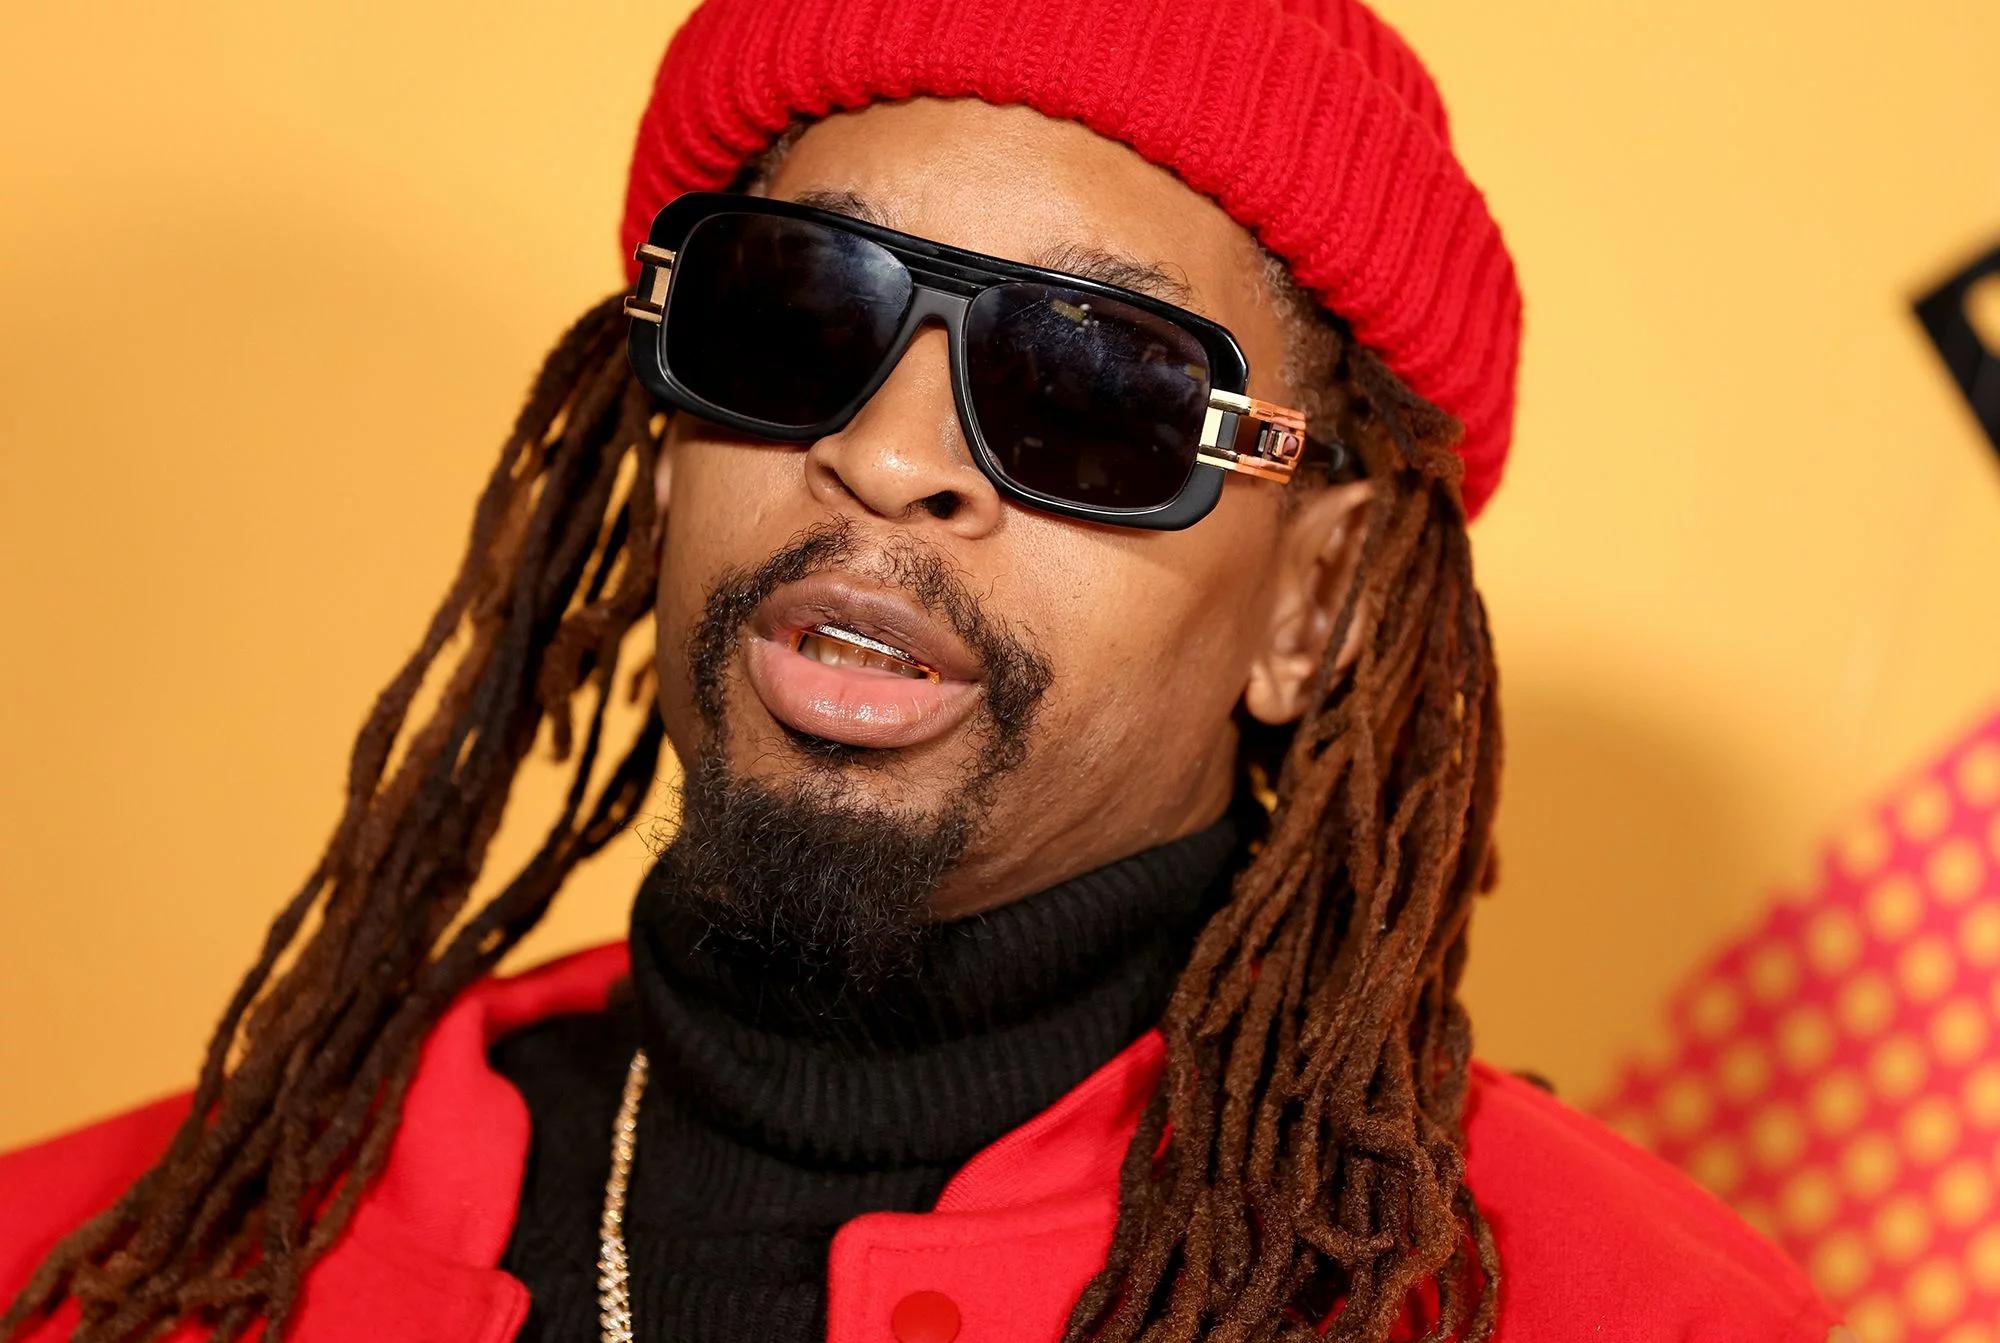 Lil Jon performs at Westlake Financial National Sales Conference [Video]